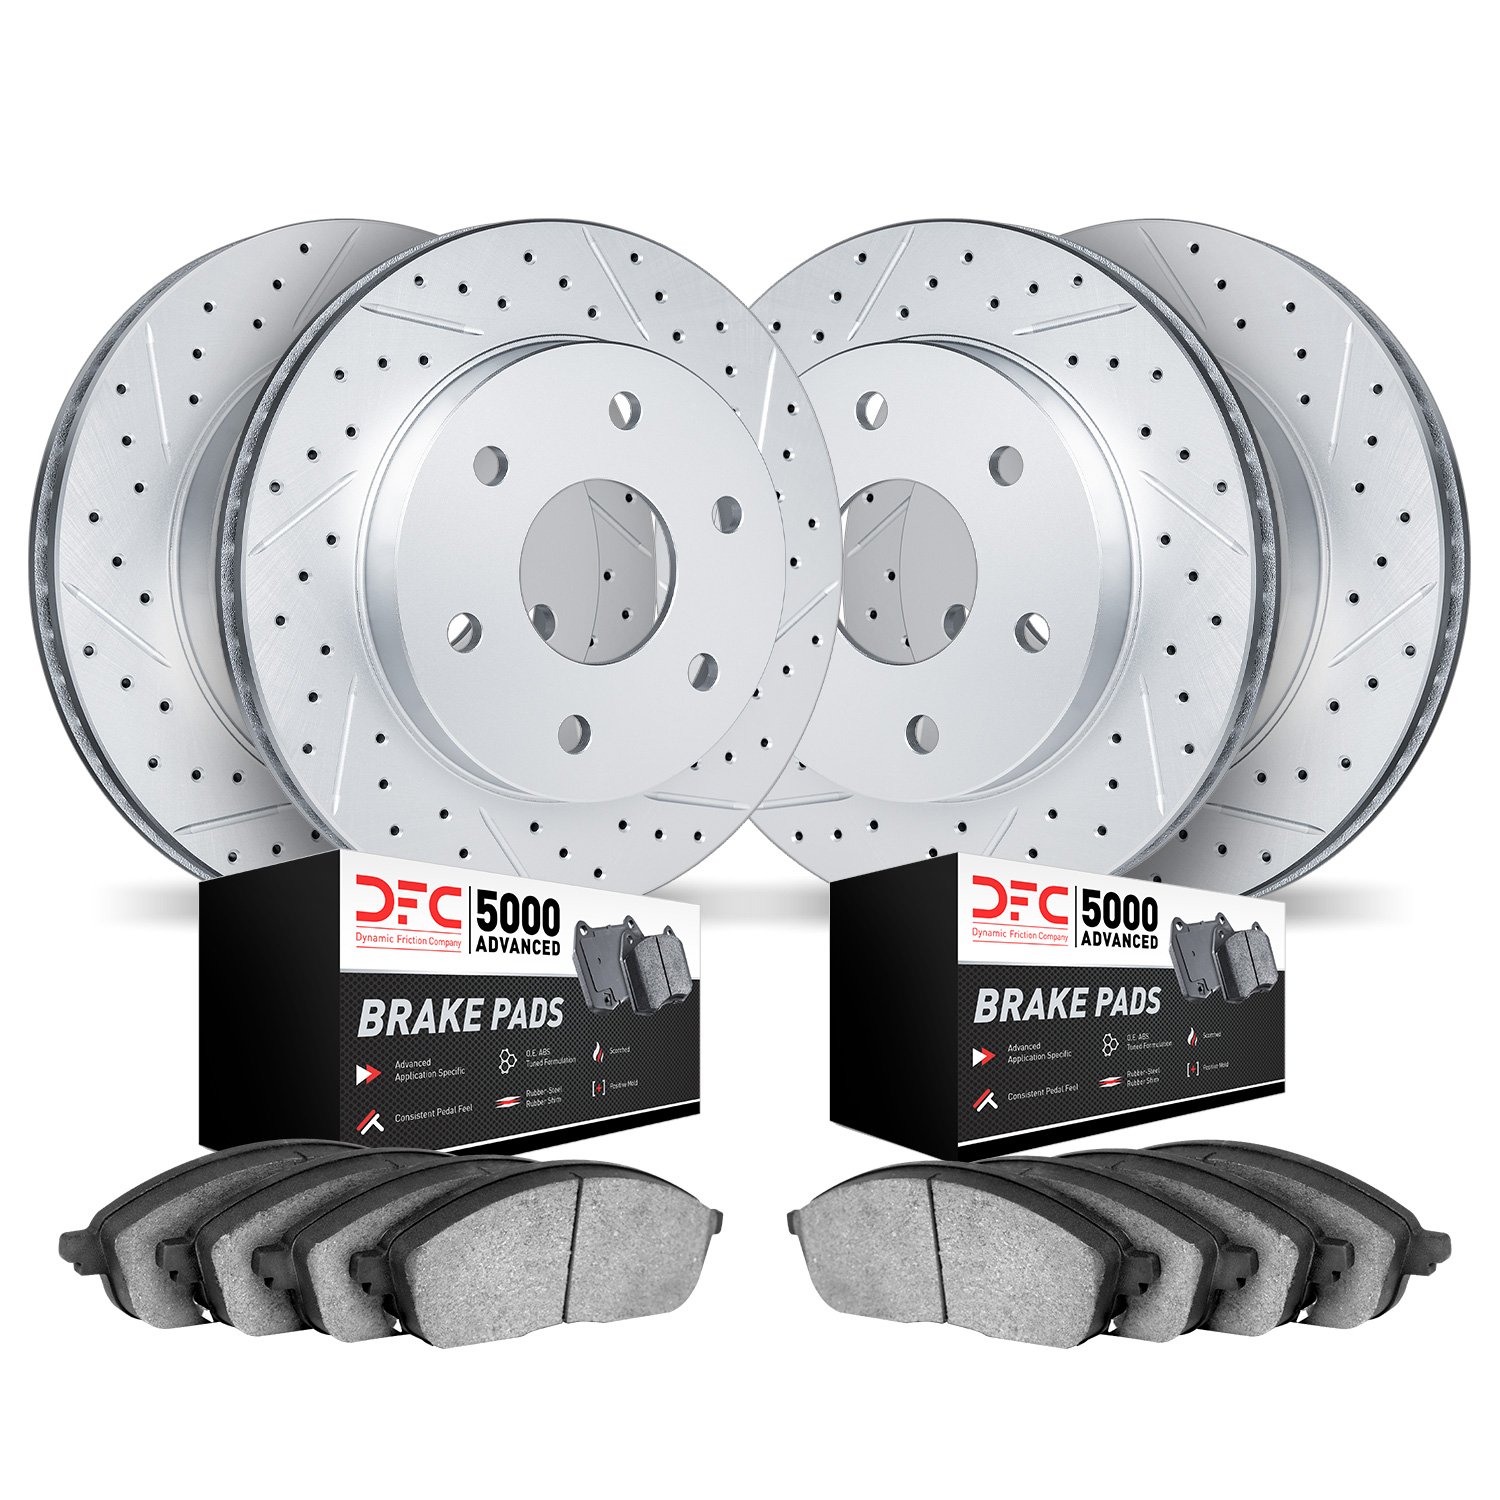 2504-54266 Geoperformance Drilled/Slotted Rotors w/5000 Advanced Brake Pads Kit, 2004-2008 Ford/Lincoln/Mercury/Mazda, Position: